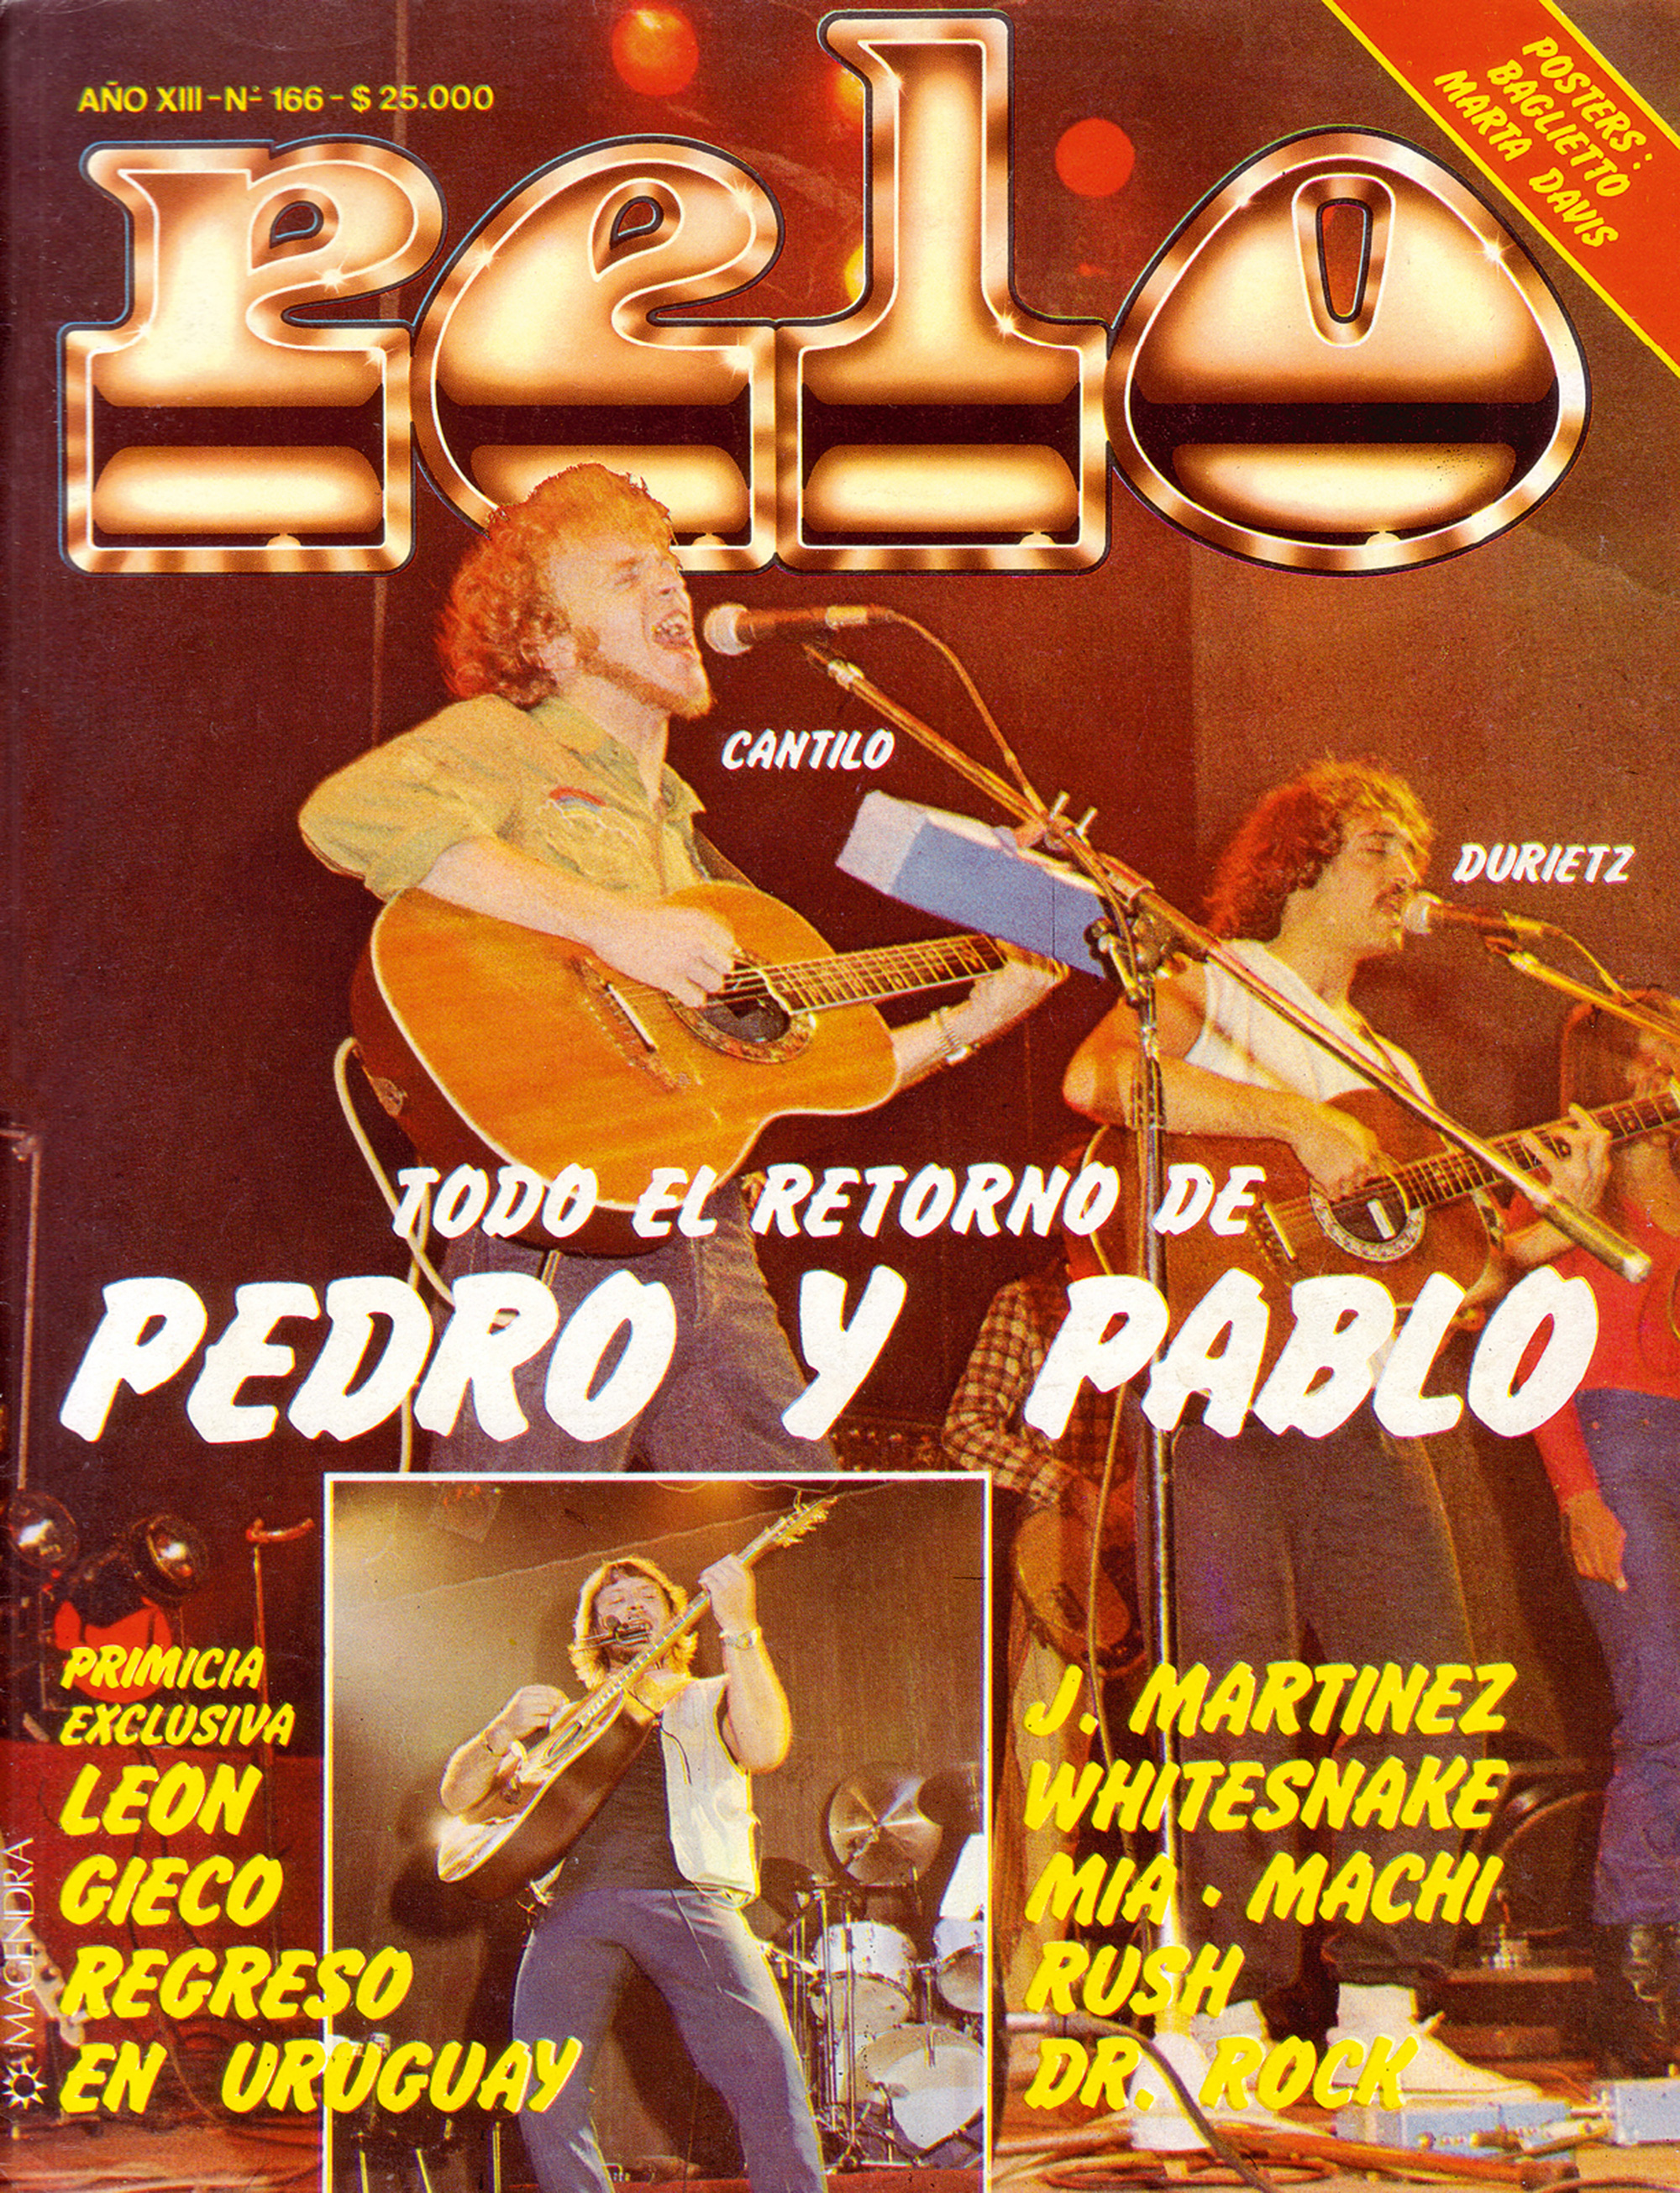 Cover of the influential music magazine Pelo (Hair), featuring the return of Pedro y Pablo, 1982.